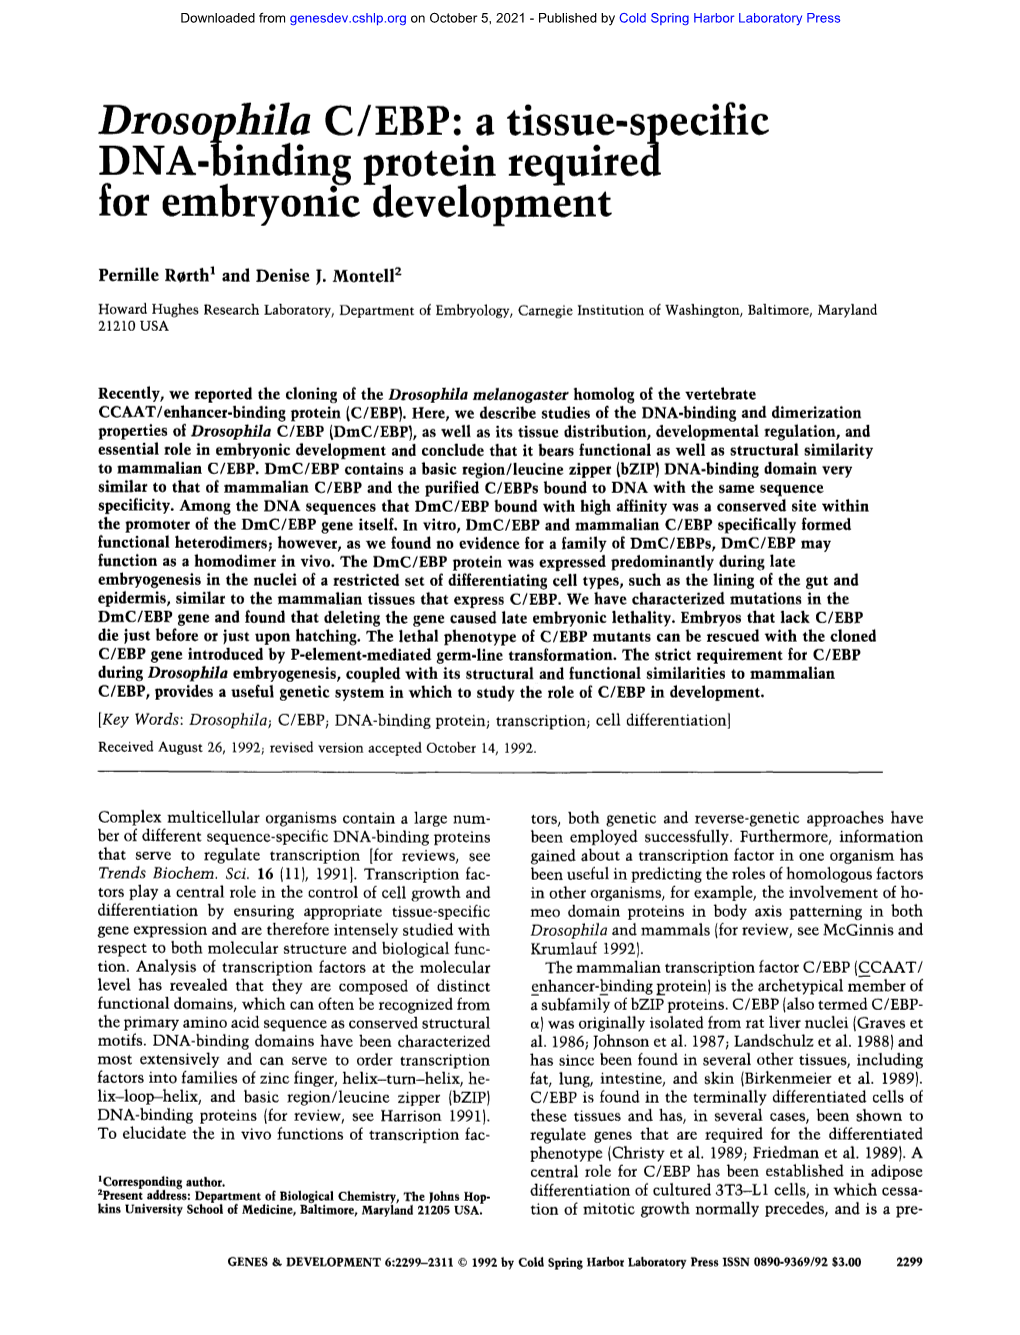 Drosophila C/EBP: a Tissue-Specific DNA-Binding Protein Requireo for Embryonic Development